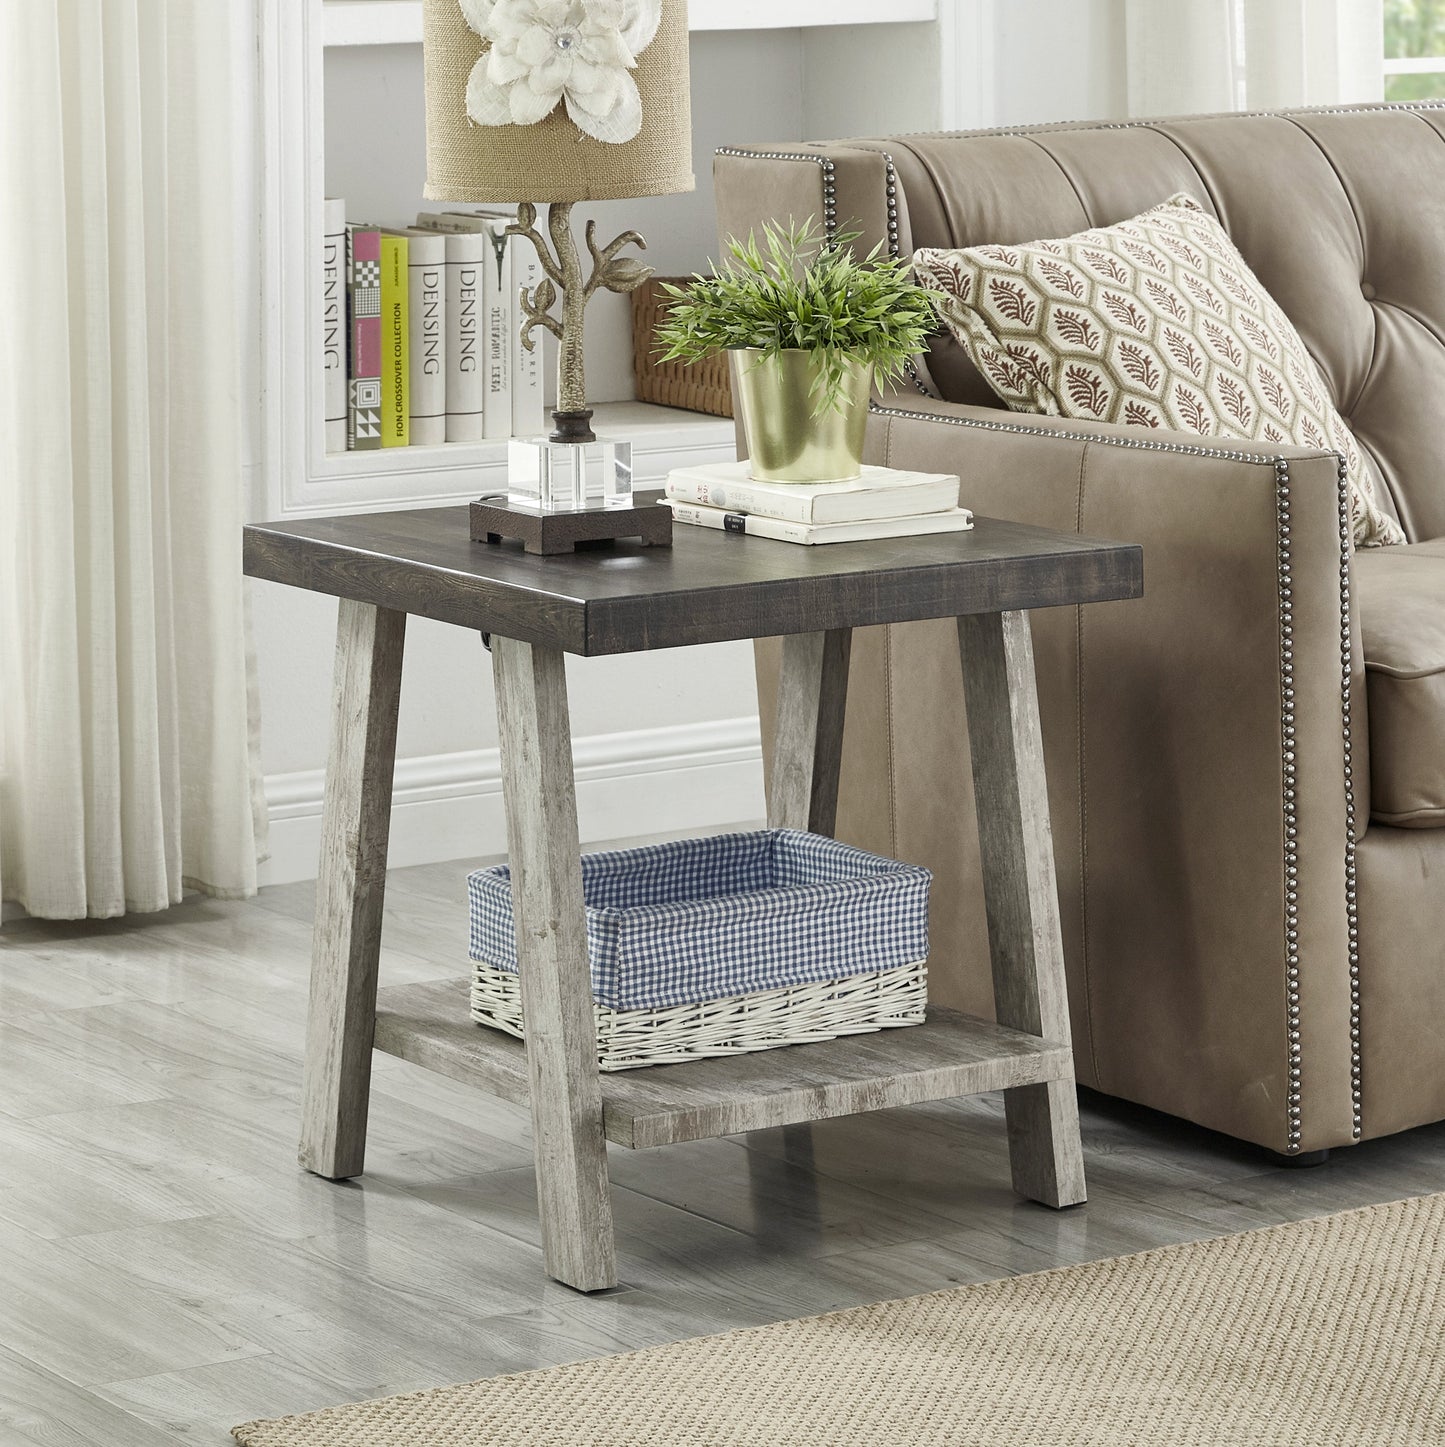 Athens Contemporary Two-Tone Wood Shelf End Table in Weathered Walnut and Gray